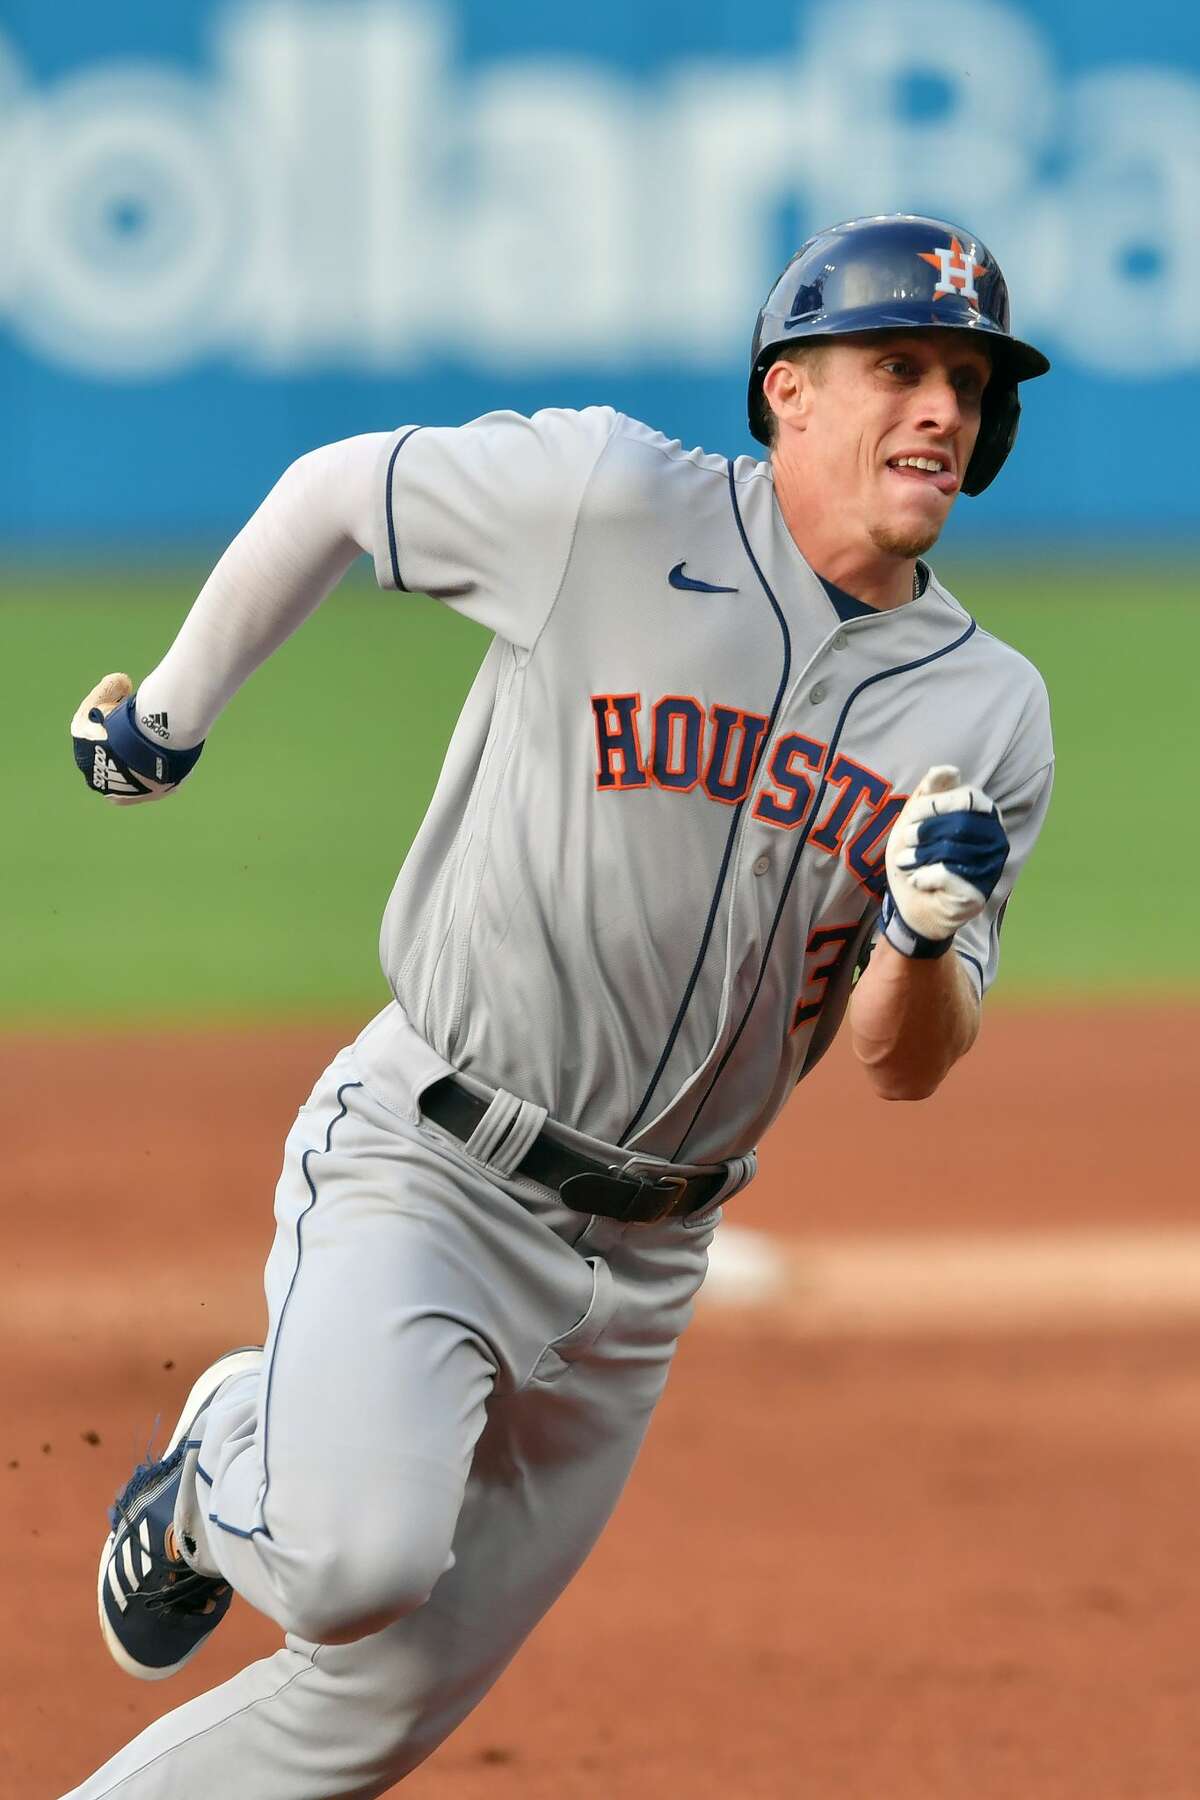 CLEVELAND, OHIO - JULY 03: Myles Straw #3 of the Houston Astros runs to third on a hit by Yuli Gurriel #10 during the first inning against the Cleveland Indians at Progressive Field on July 03, 2021 in Cleveland, Ohio. (Photo by Jason Miller/Getty Images)